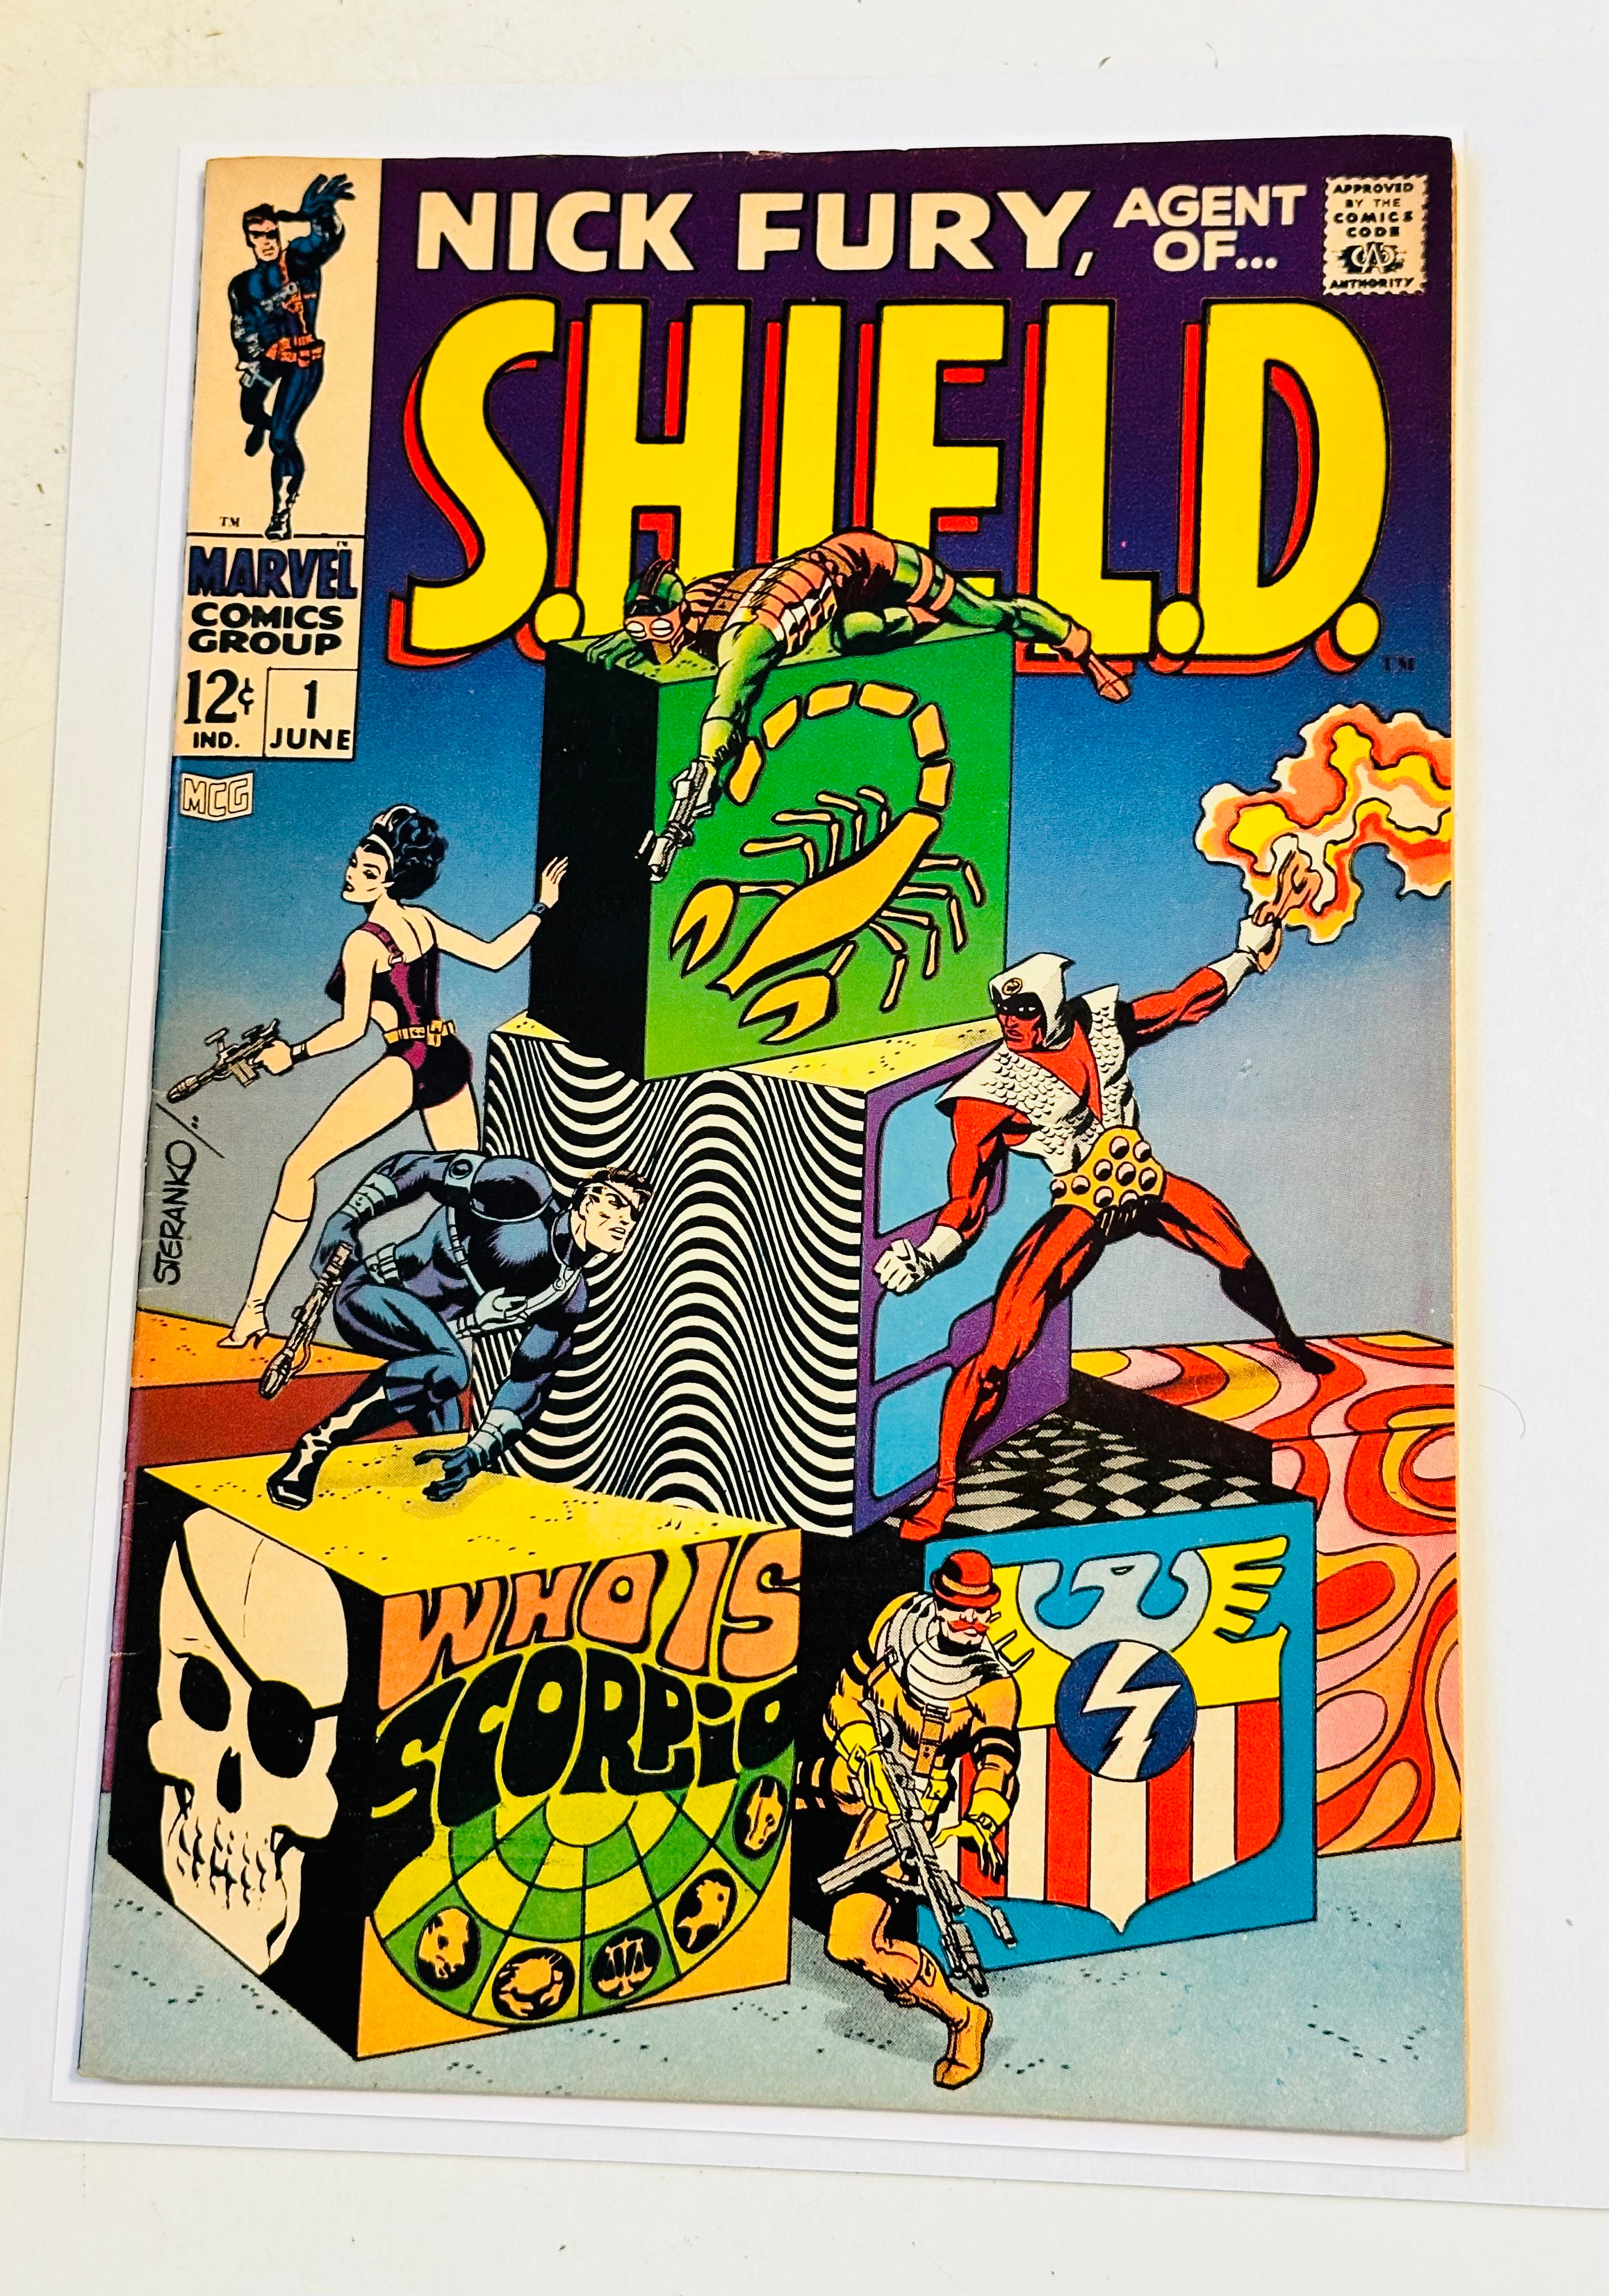 Nick fury, agent of shield, rare number one first issue, high-grade comic book 1968